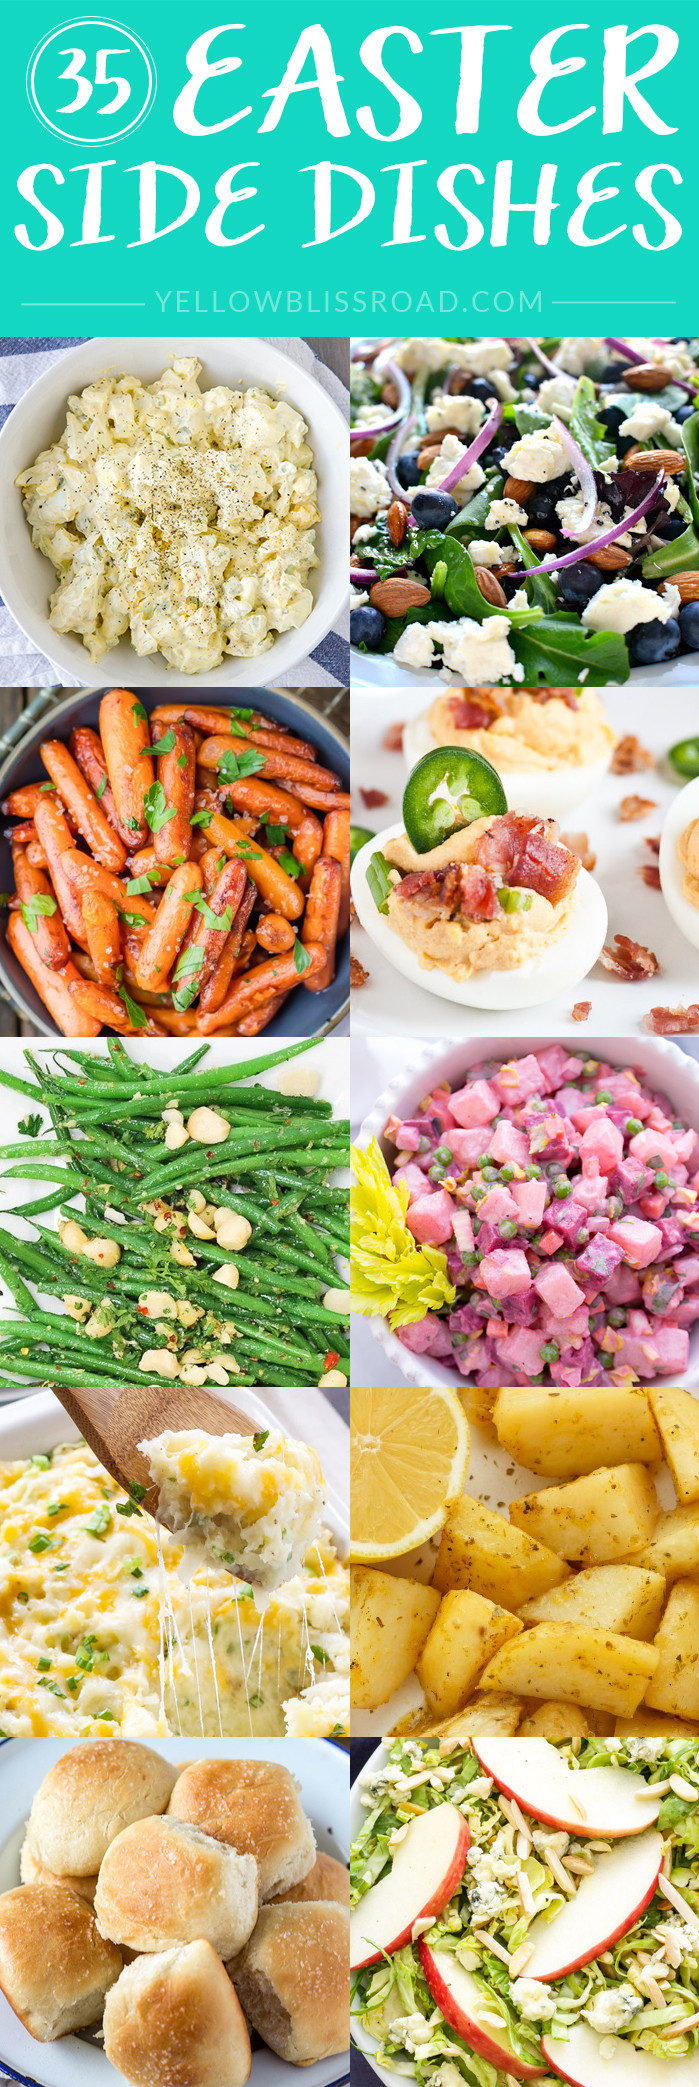 Side Dishes For Easter Dinner
 Easter Side Dishes More than 50 of the Best Sides for